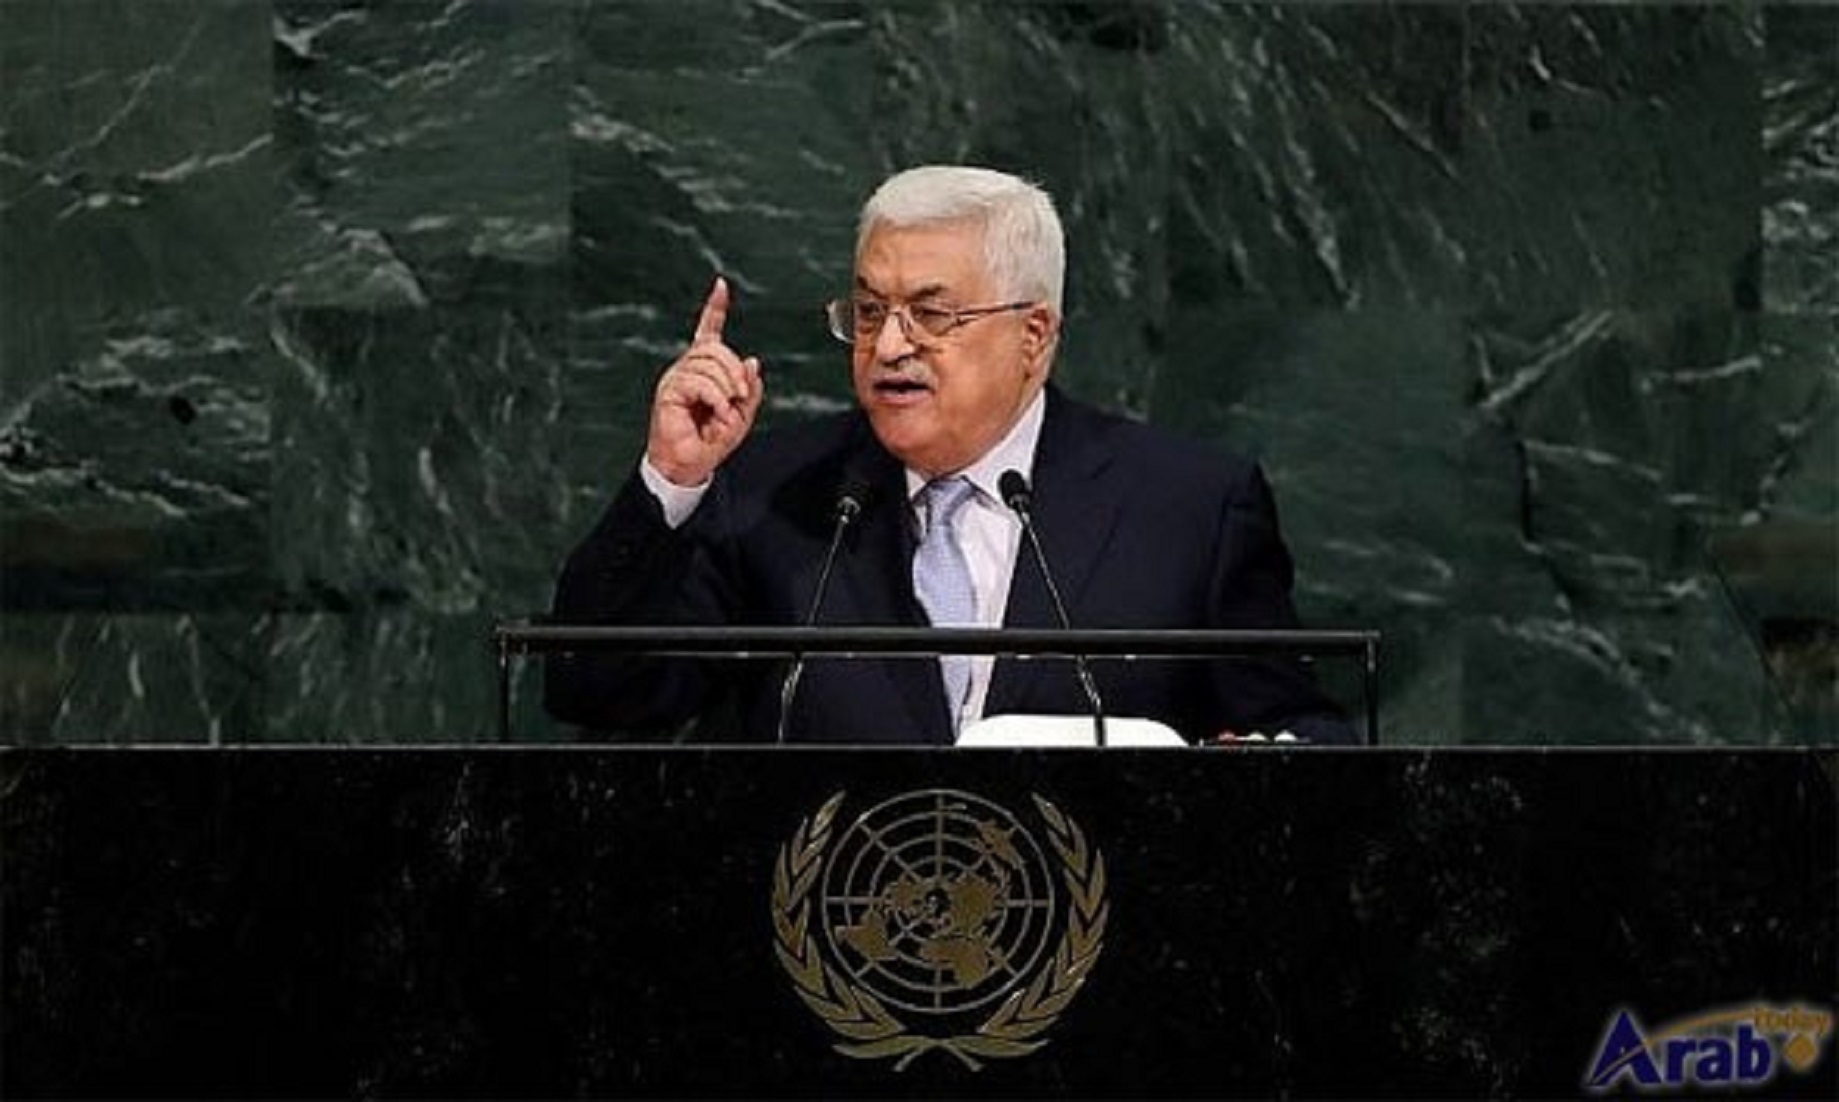 Abbas To Address UNSC Next Week On U.S. Mideast Peace Deal: Official